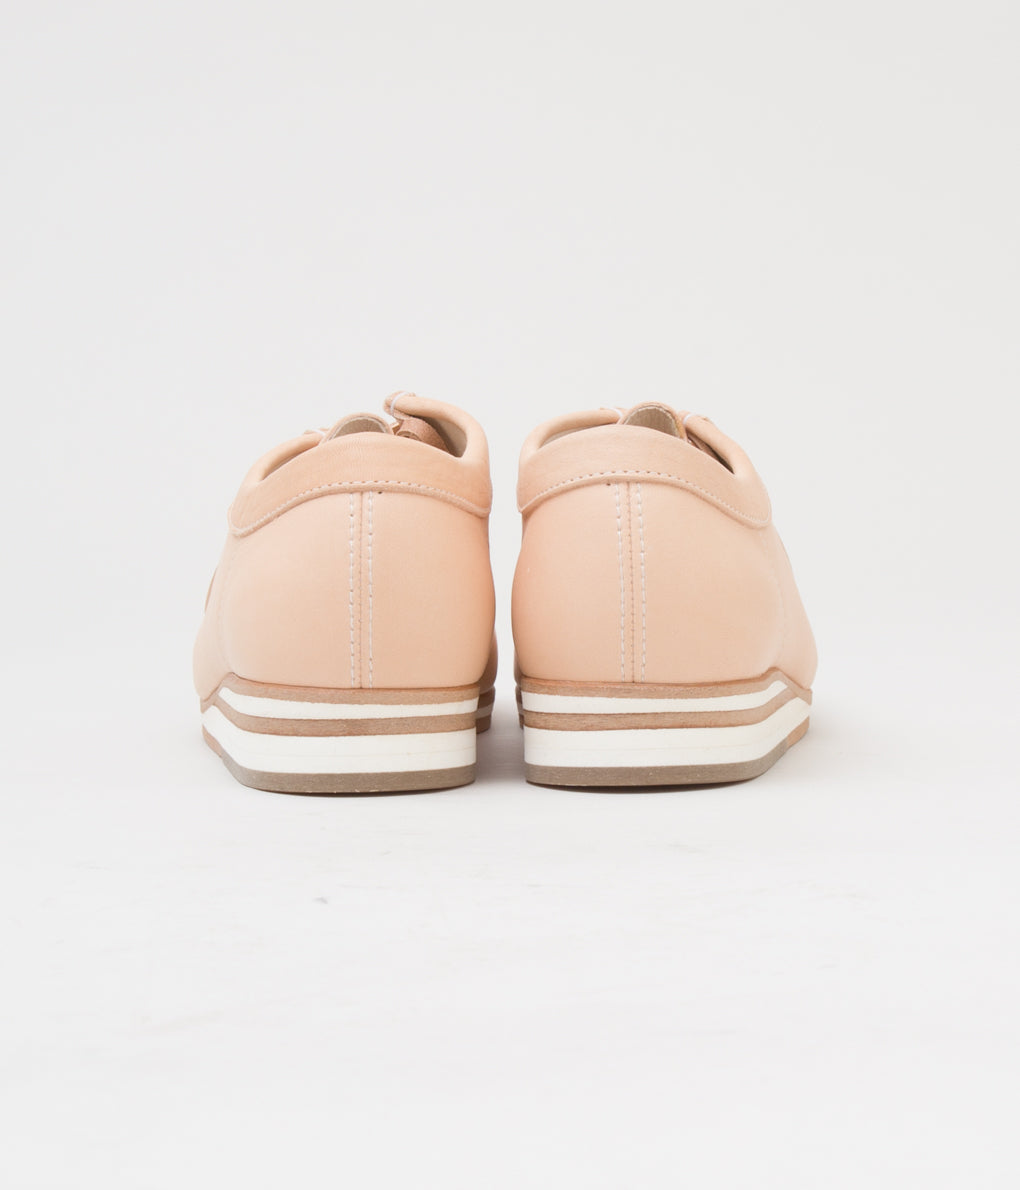 HENDER SCHEME "MANUAL INDUSTRIAL PRODUCTS 29"(NATURAL)